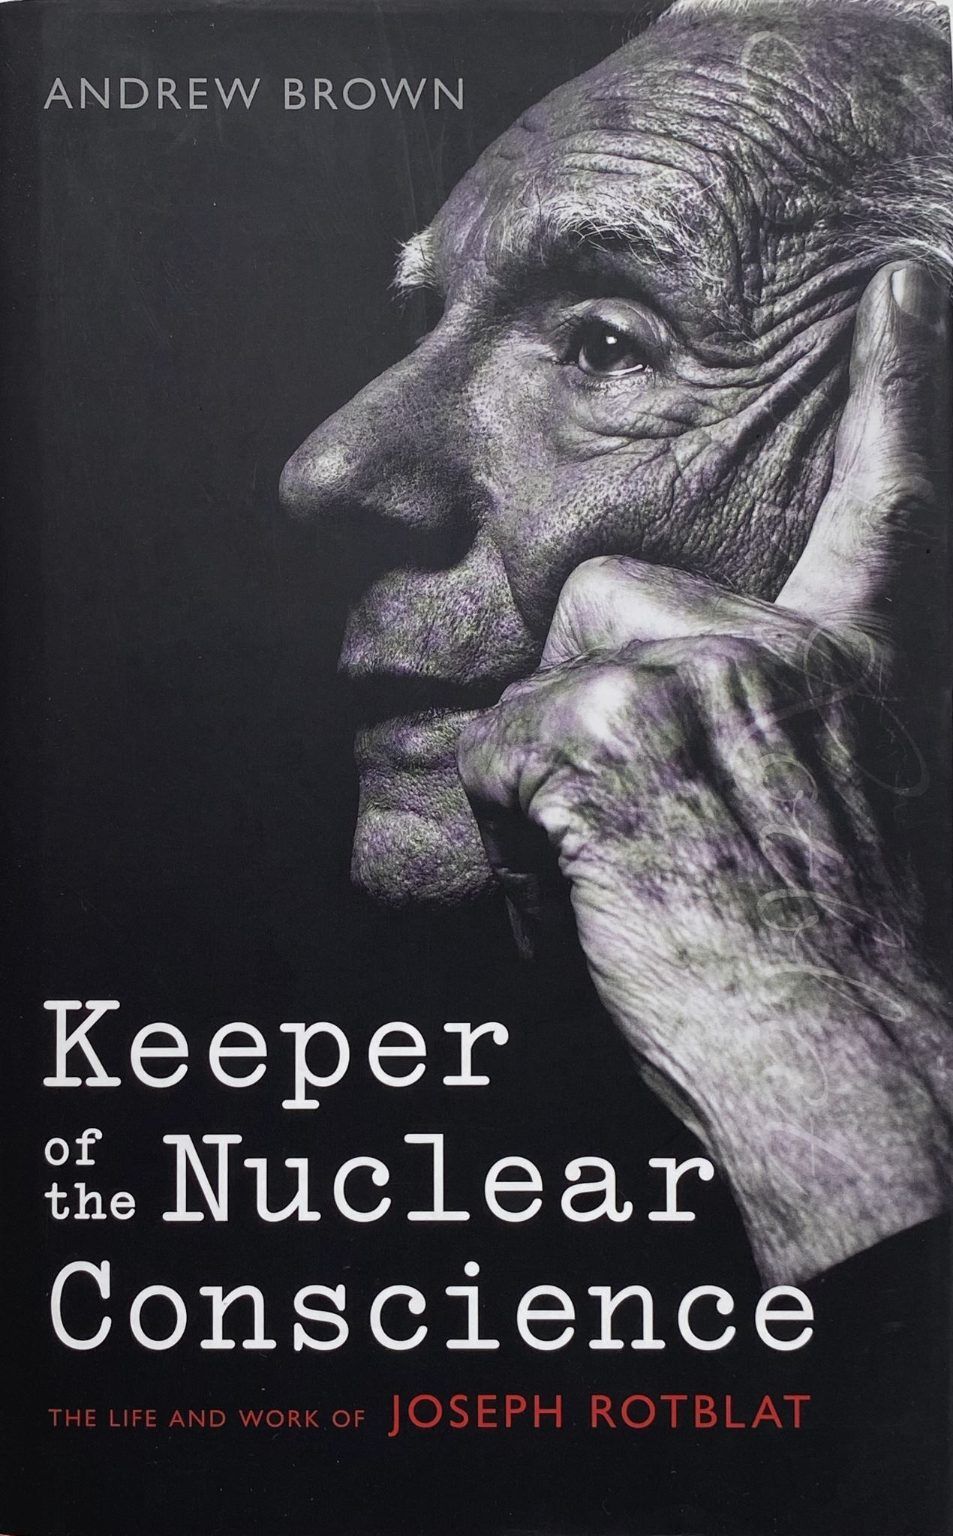 KEEPER OF THE NUCLEAR CONSCIENCE: The Life and Work of Joseph Rotblat